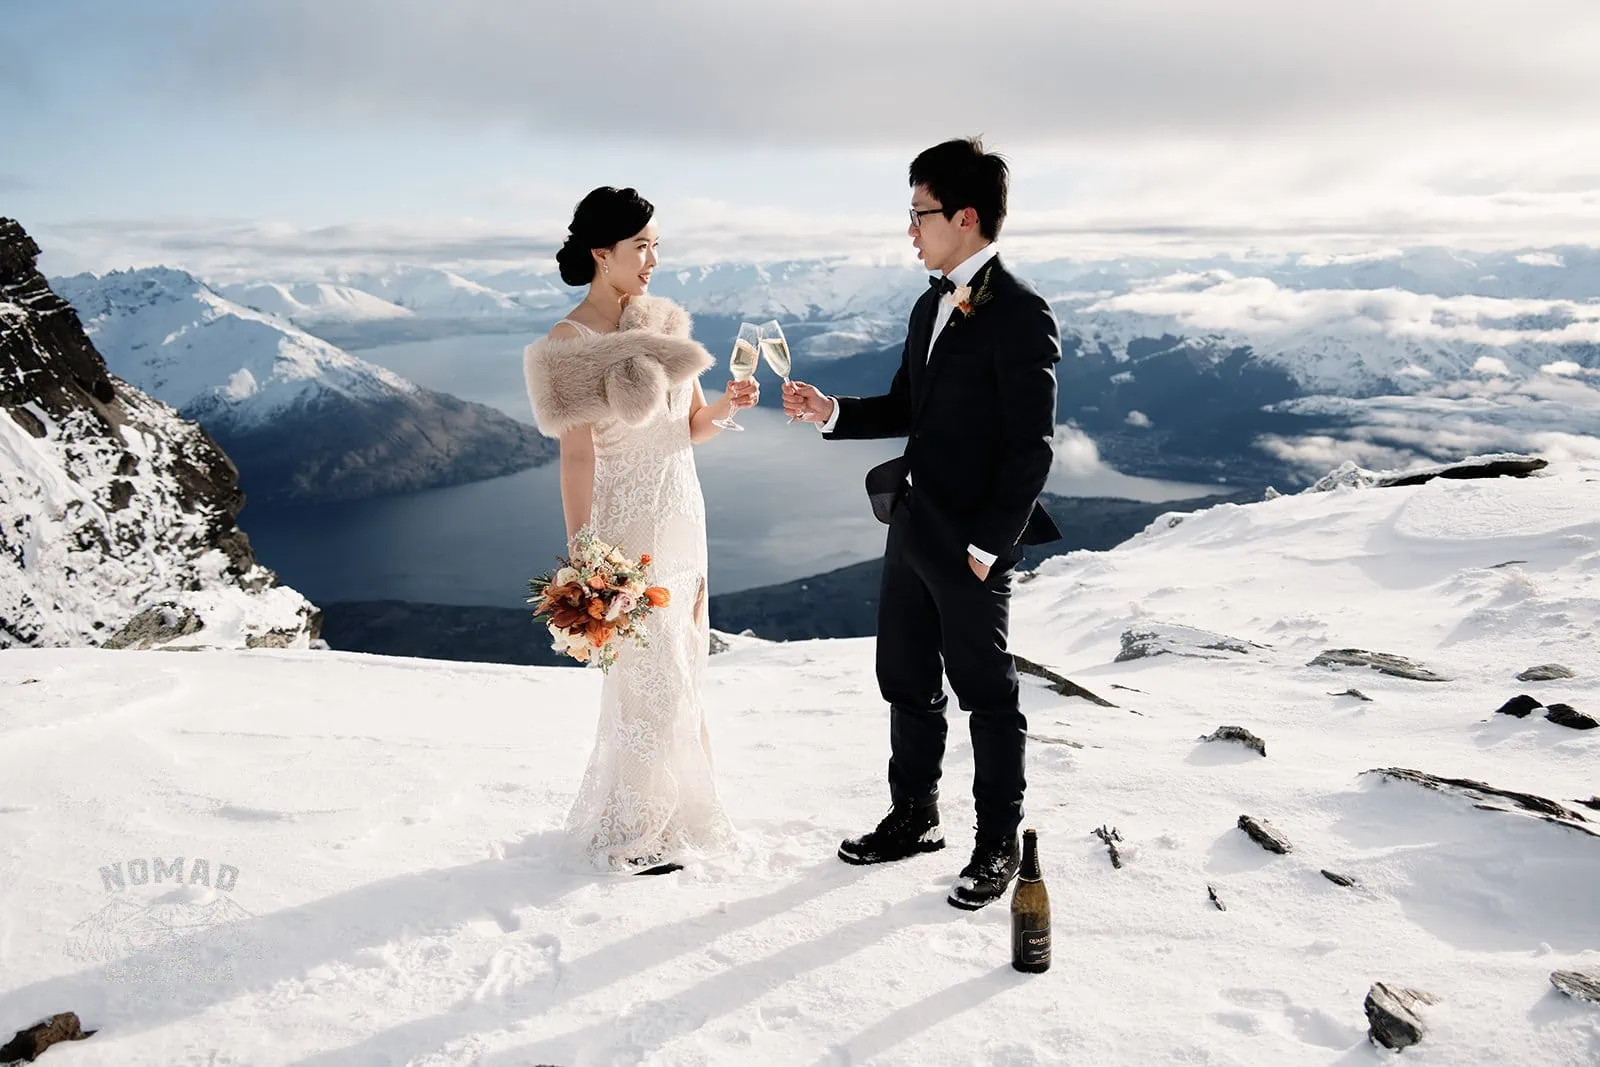 Joanna and Tony having a pre-wedding shoot, toasting champagne on top of a snowy mountain in Queenstown, New Zealand.